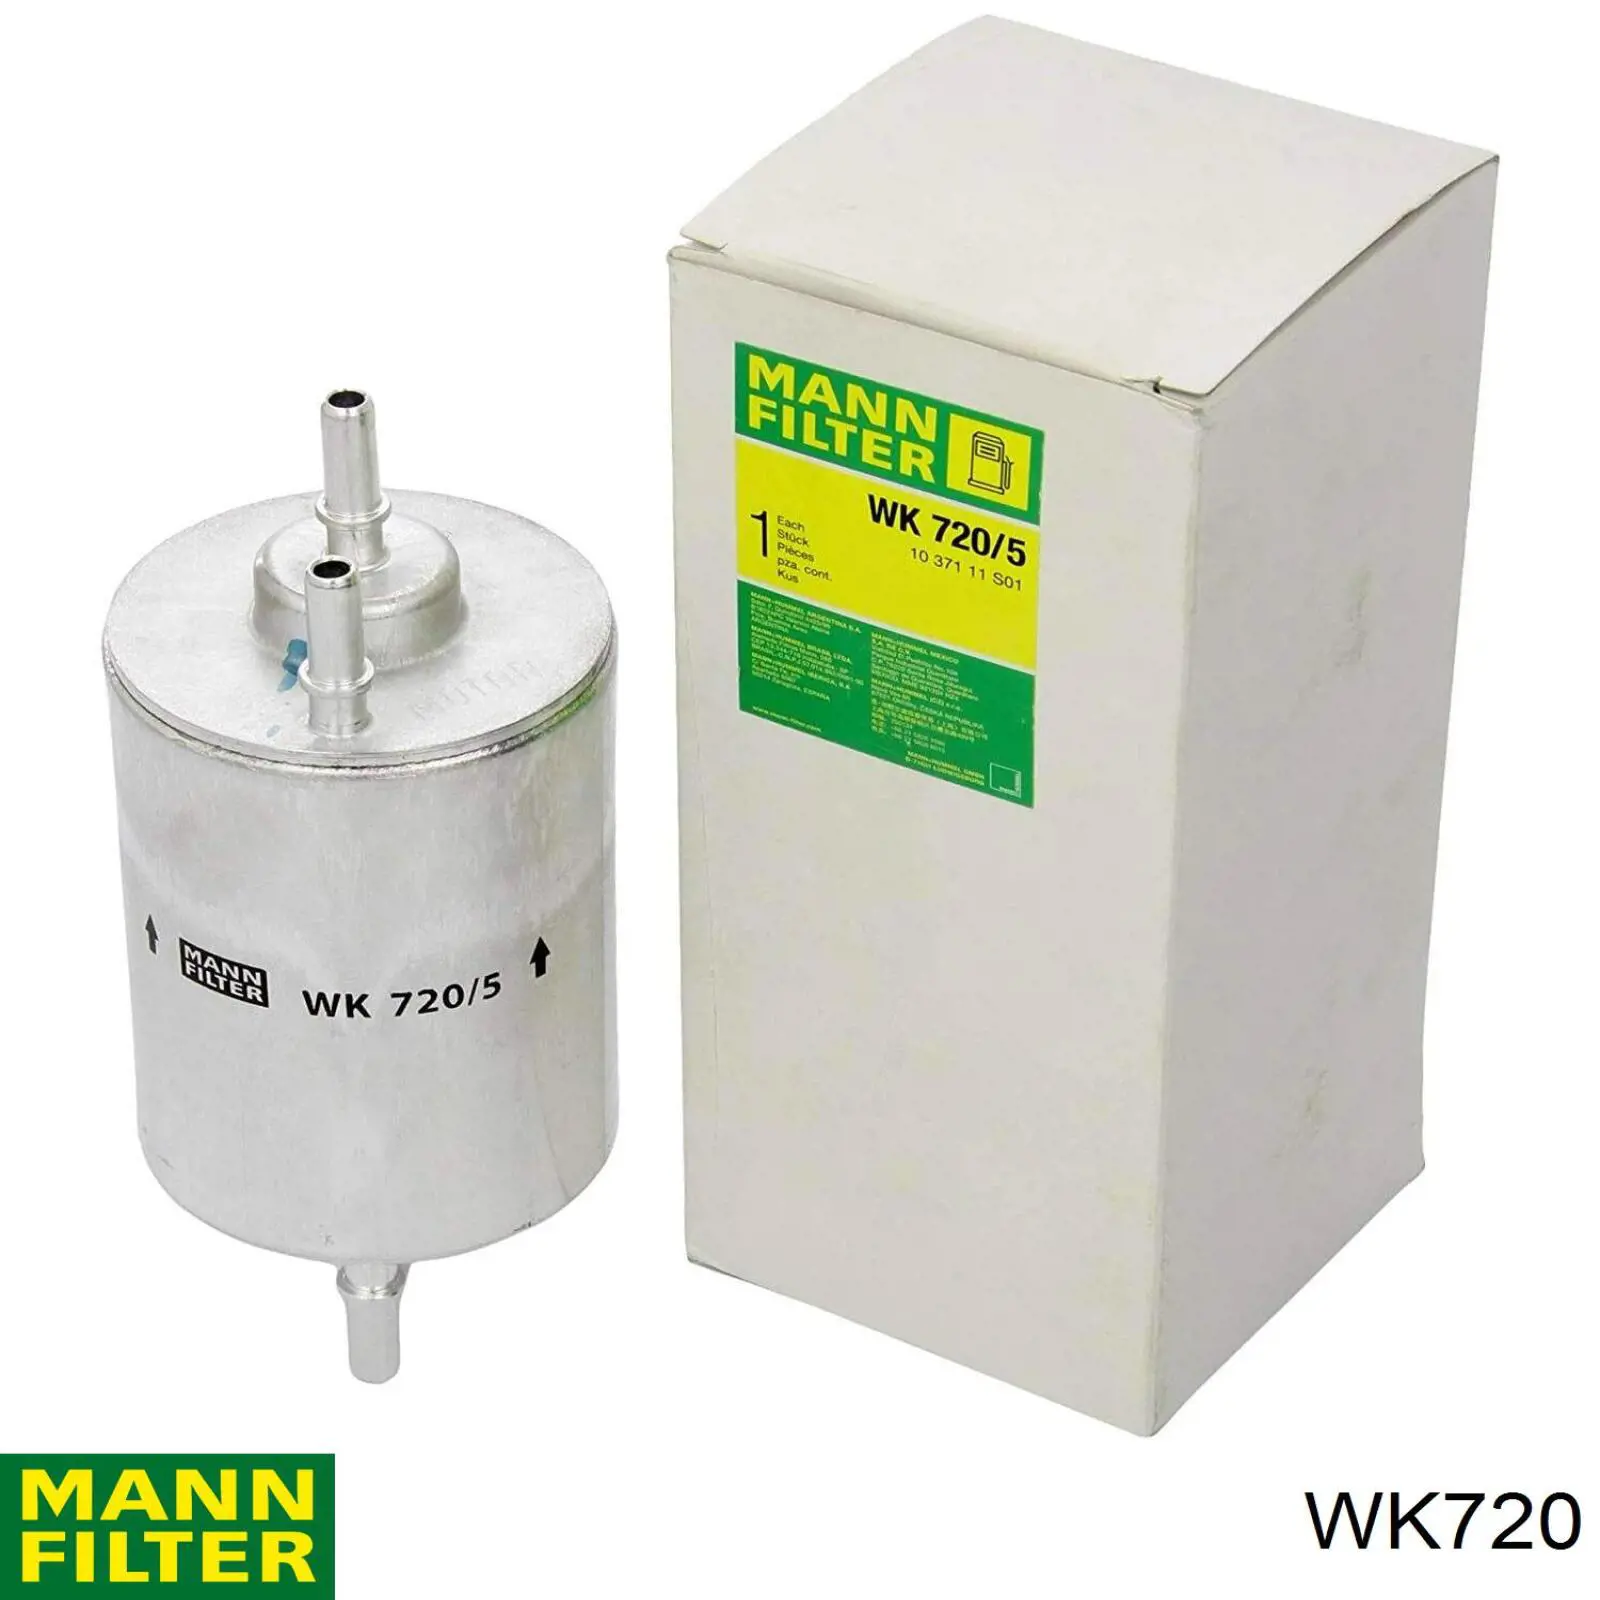 WK720 Mann-Filter filtro combustible